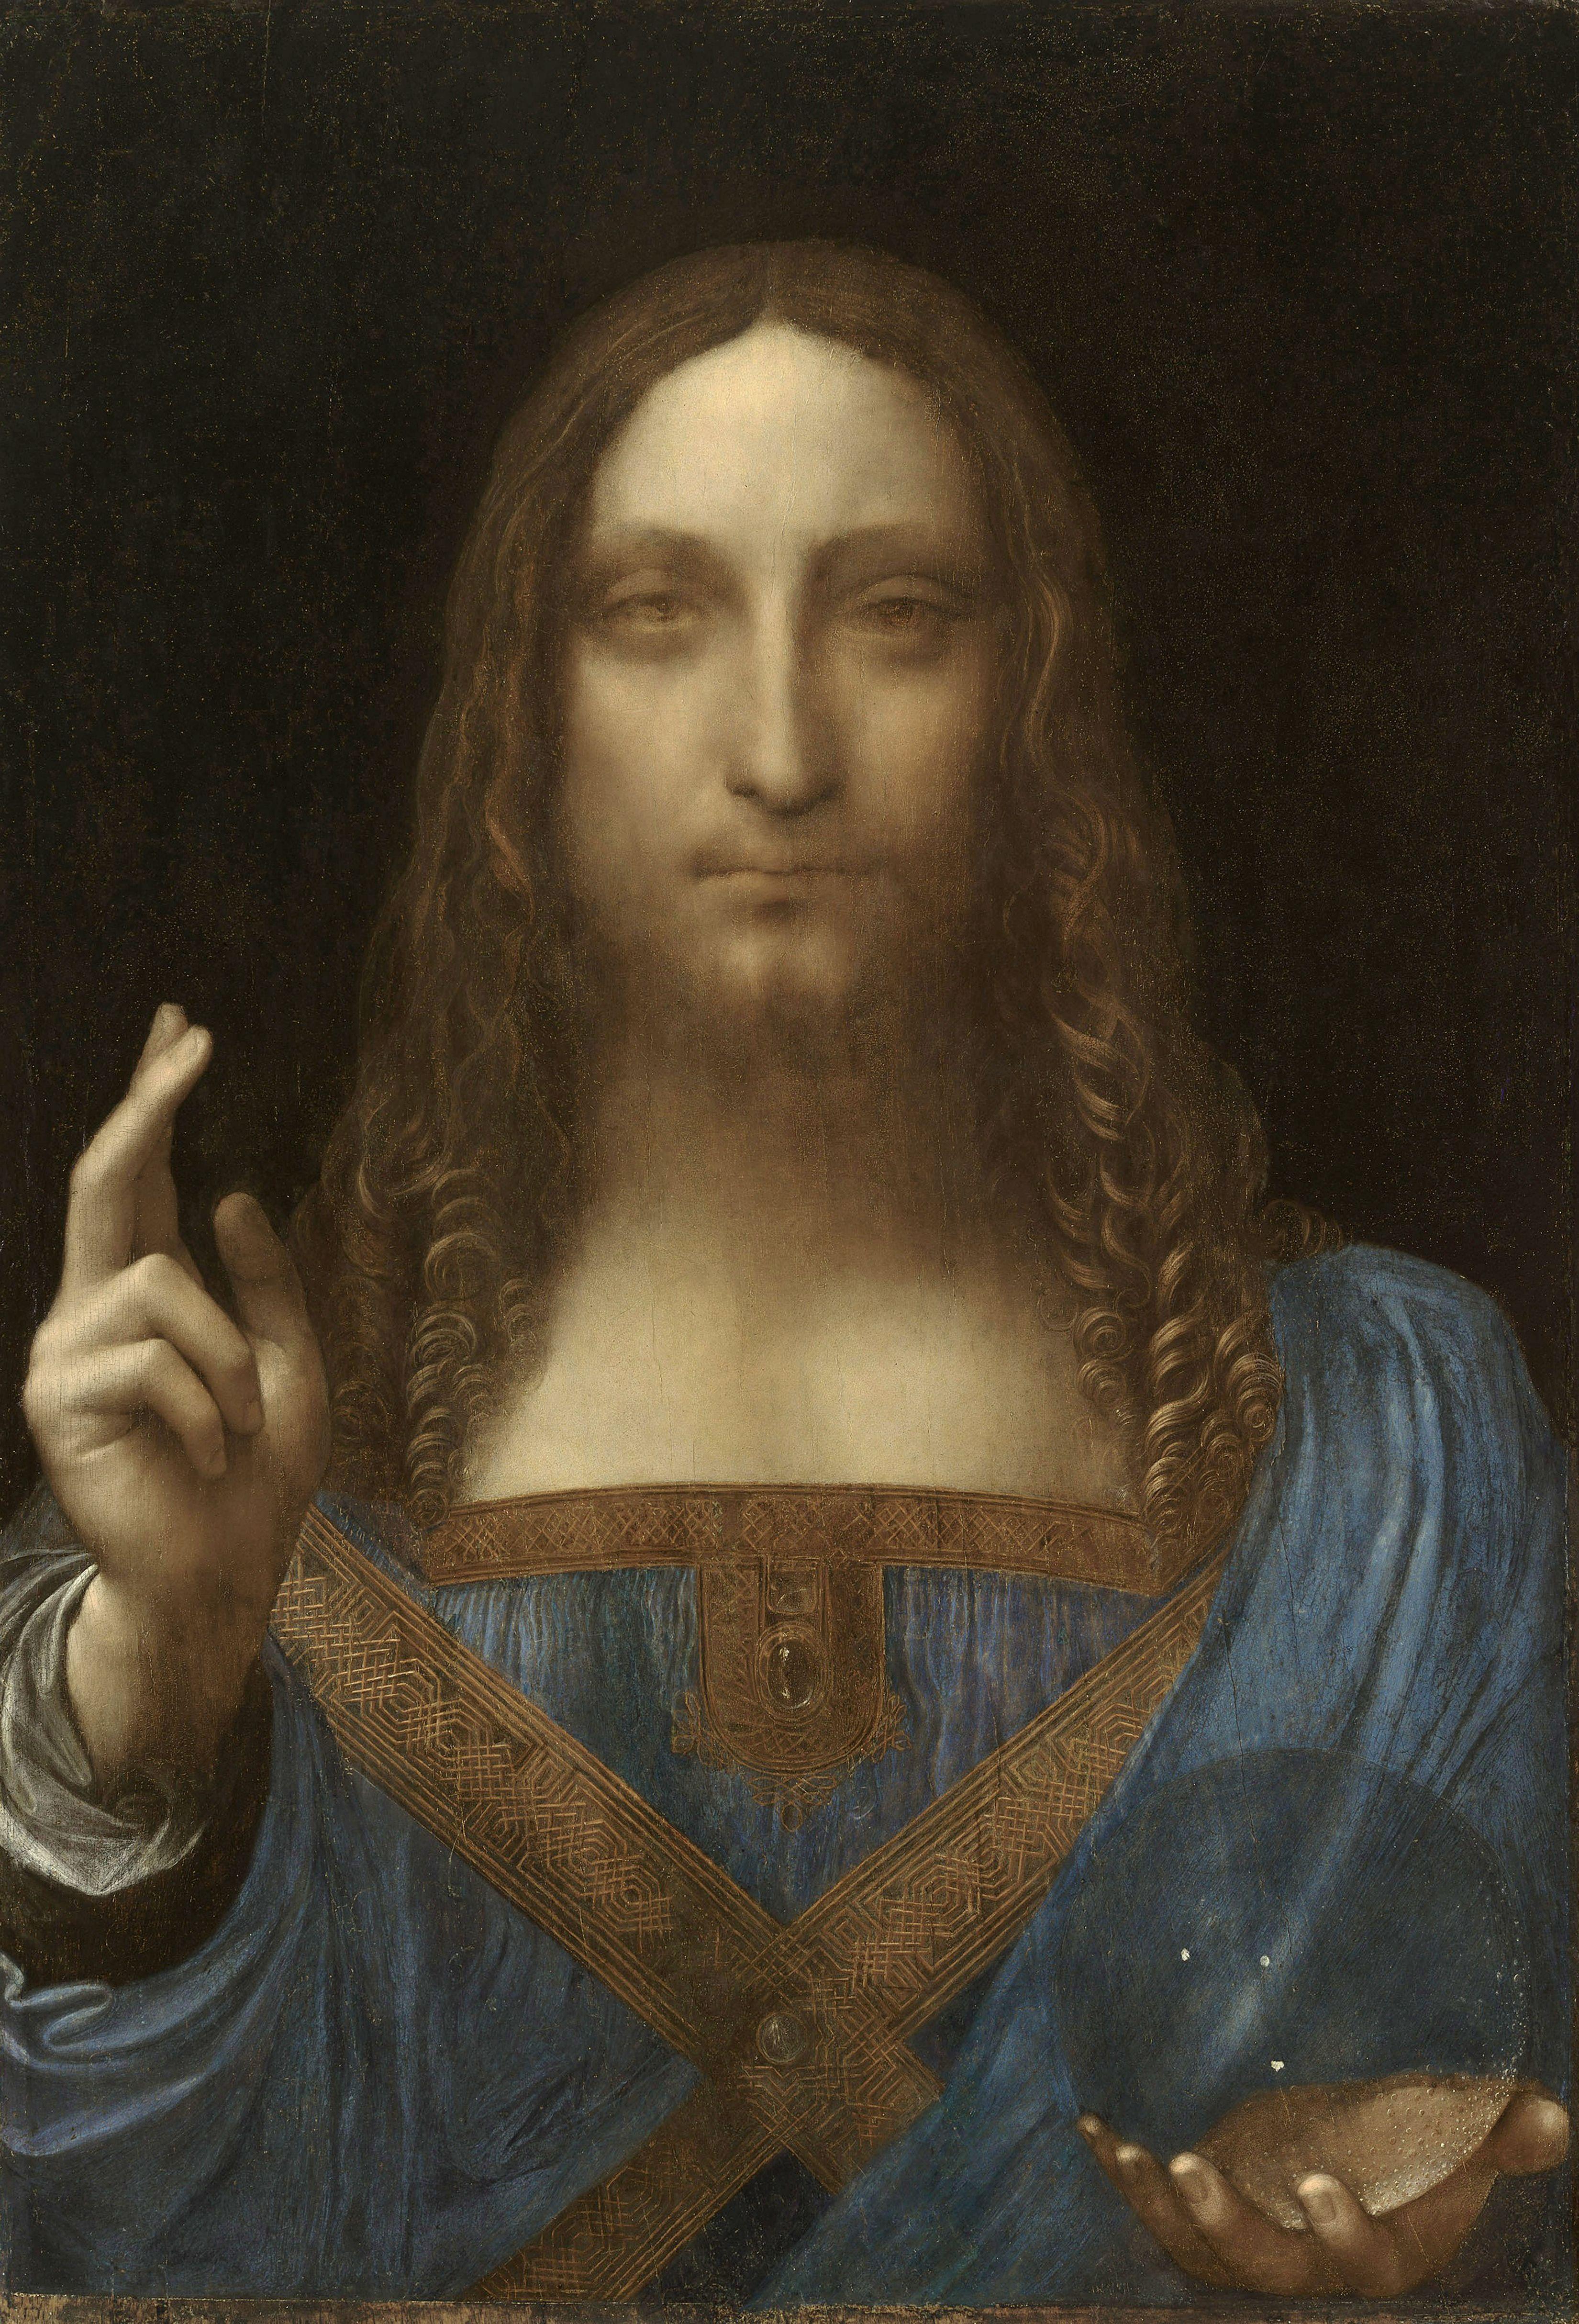 Stunning 'Long Lost' Da Vinci Painting Sells For Record $450